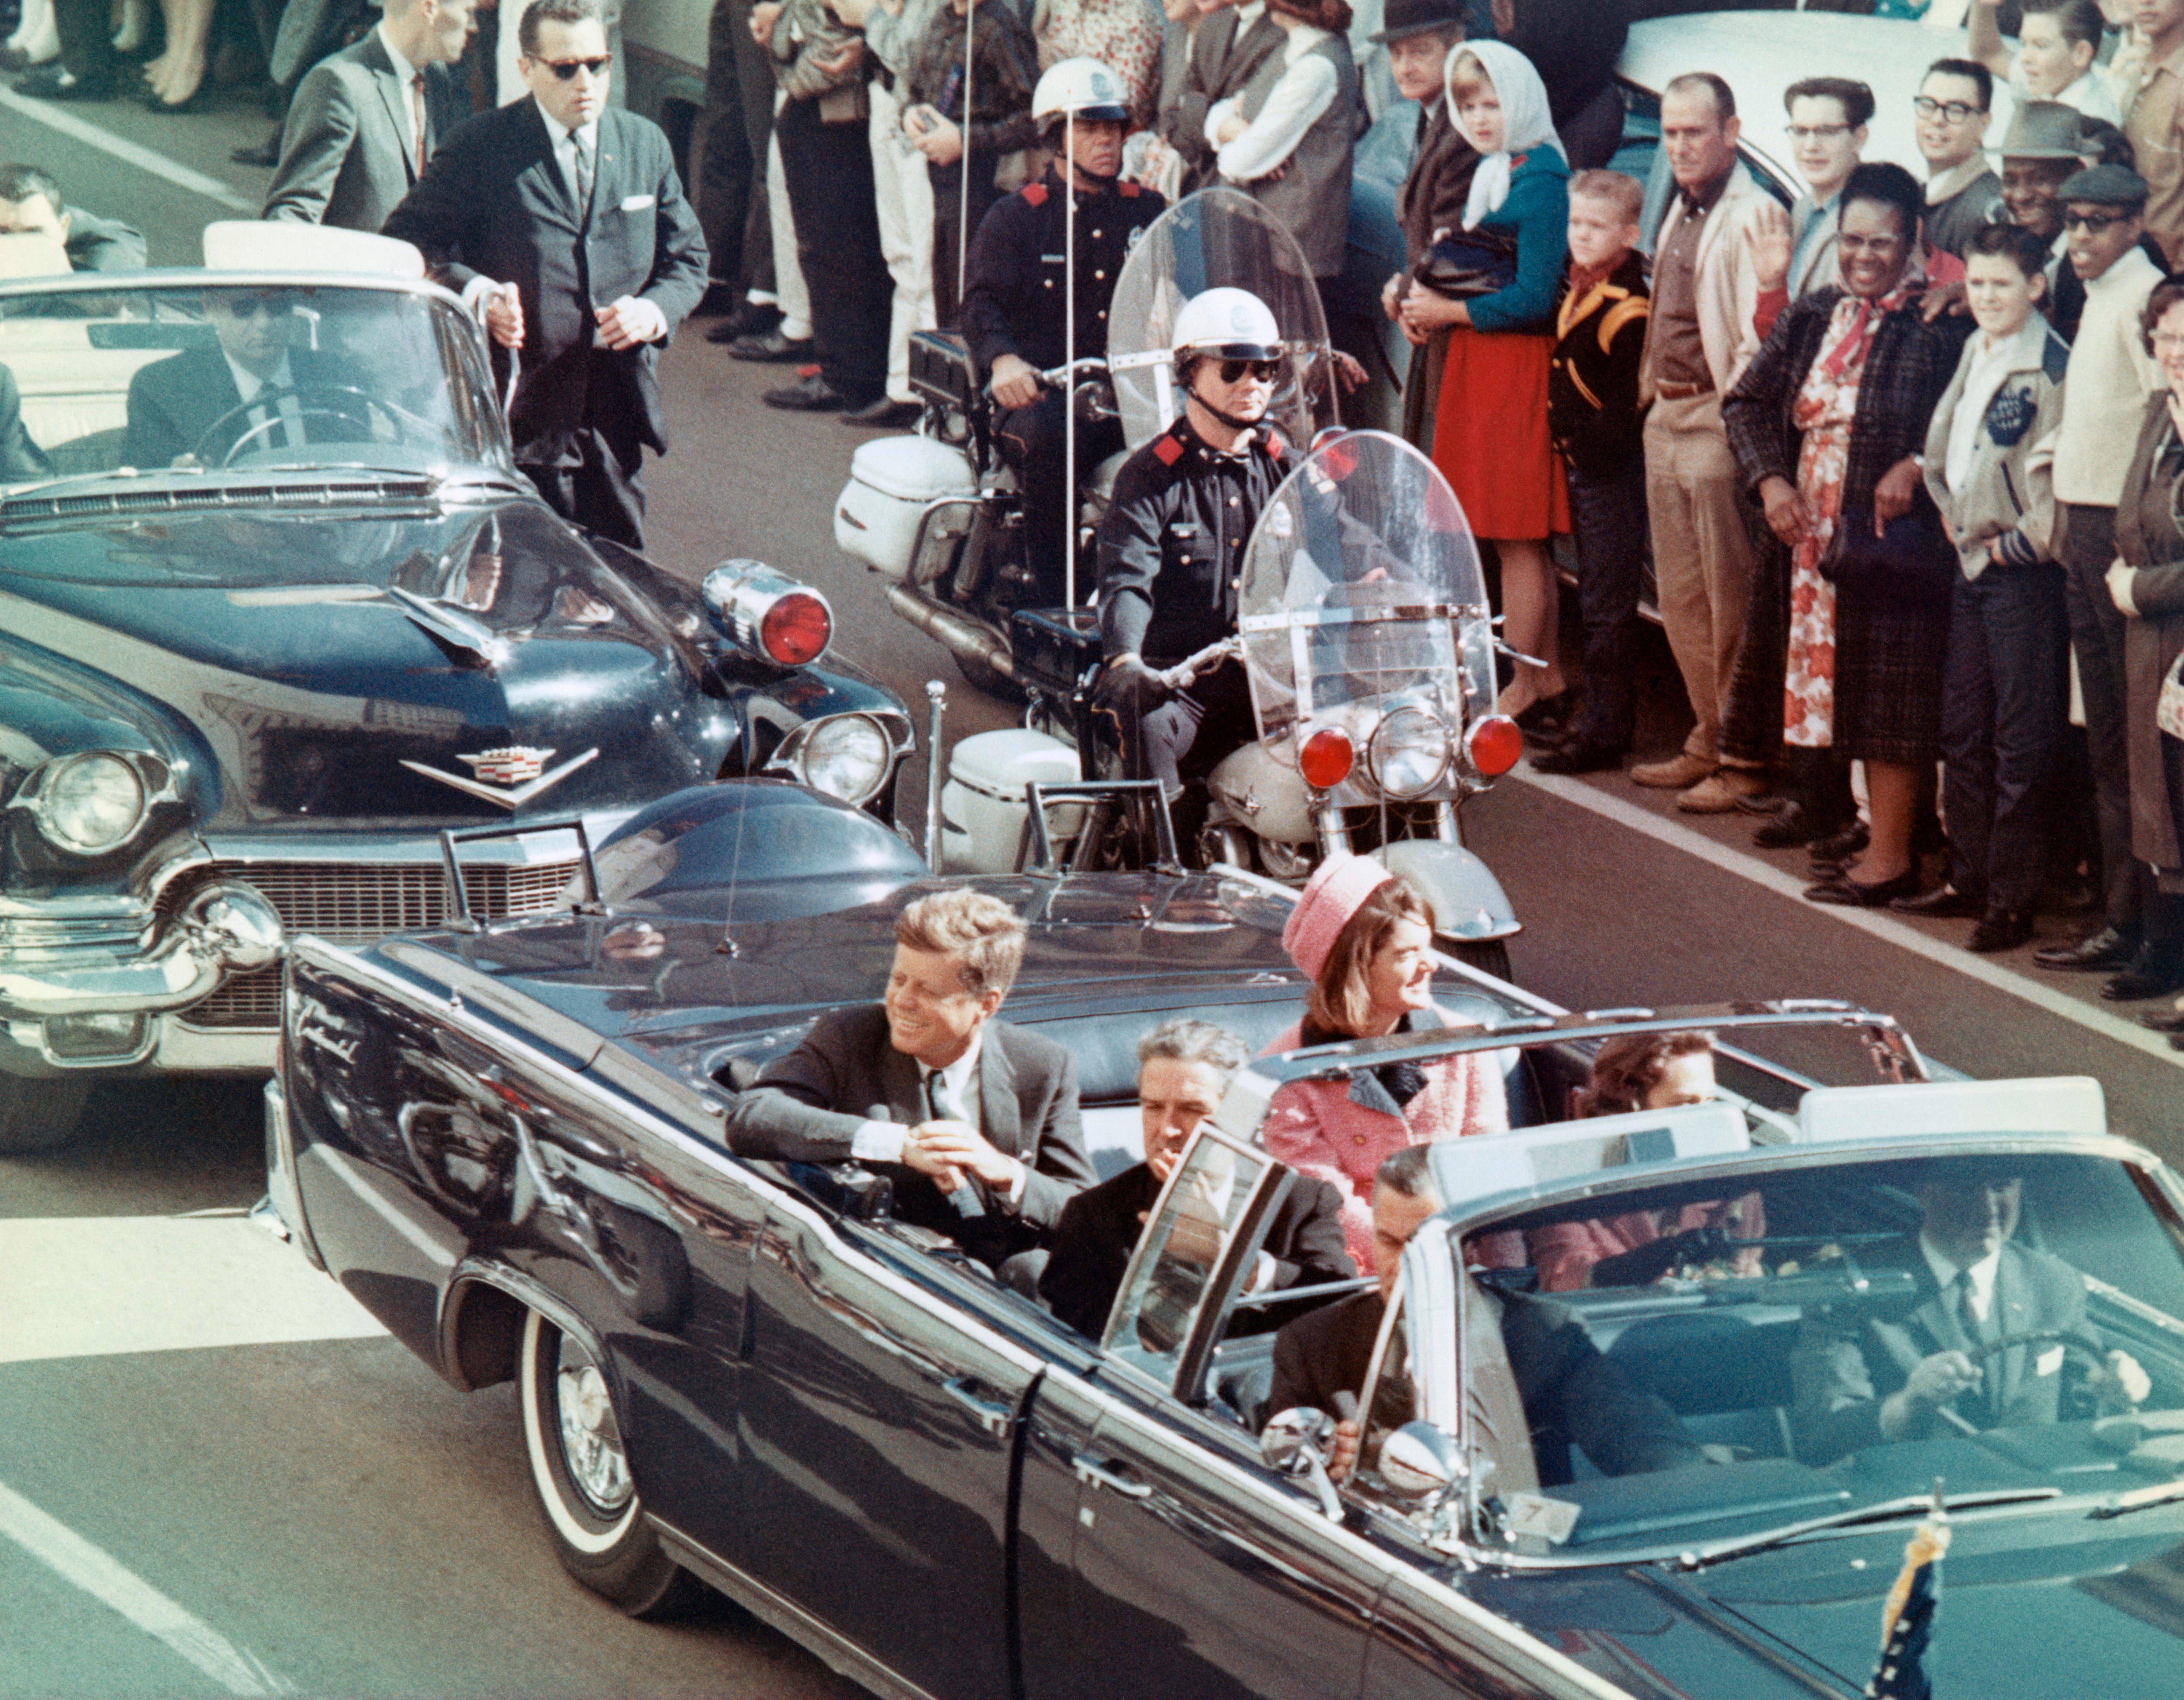 Father Huber, the Secret Service, and the Kennedy assassination